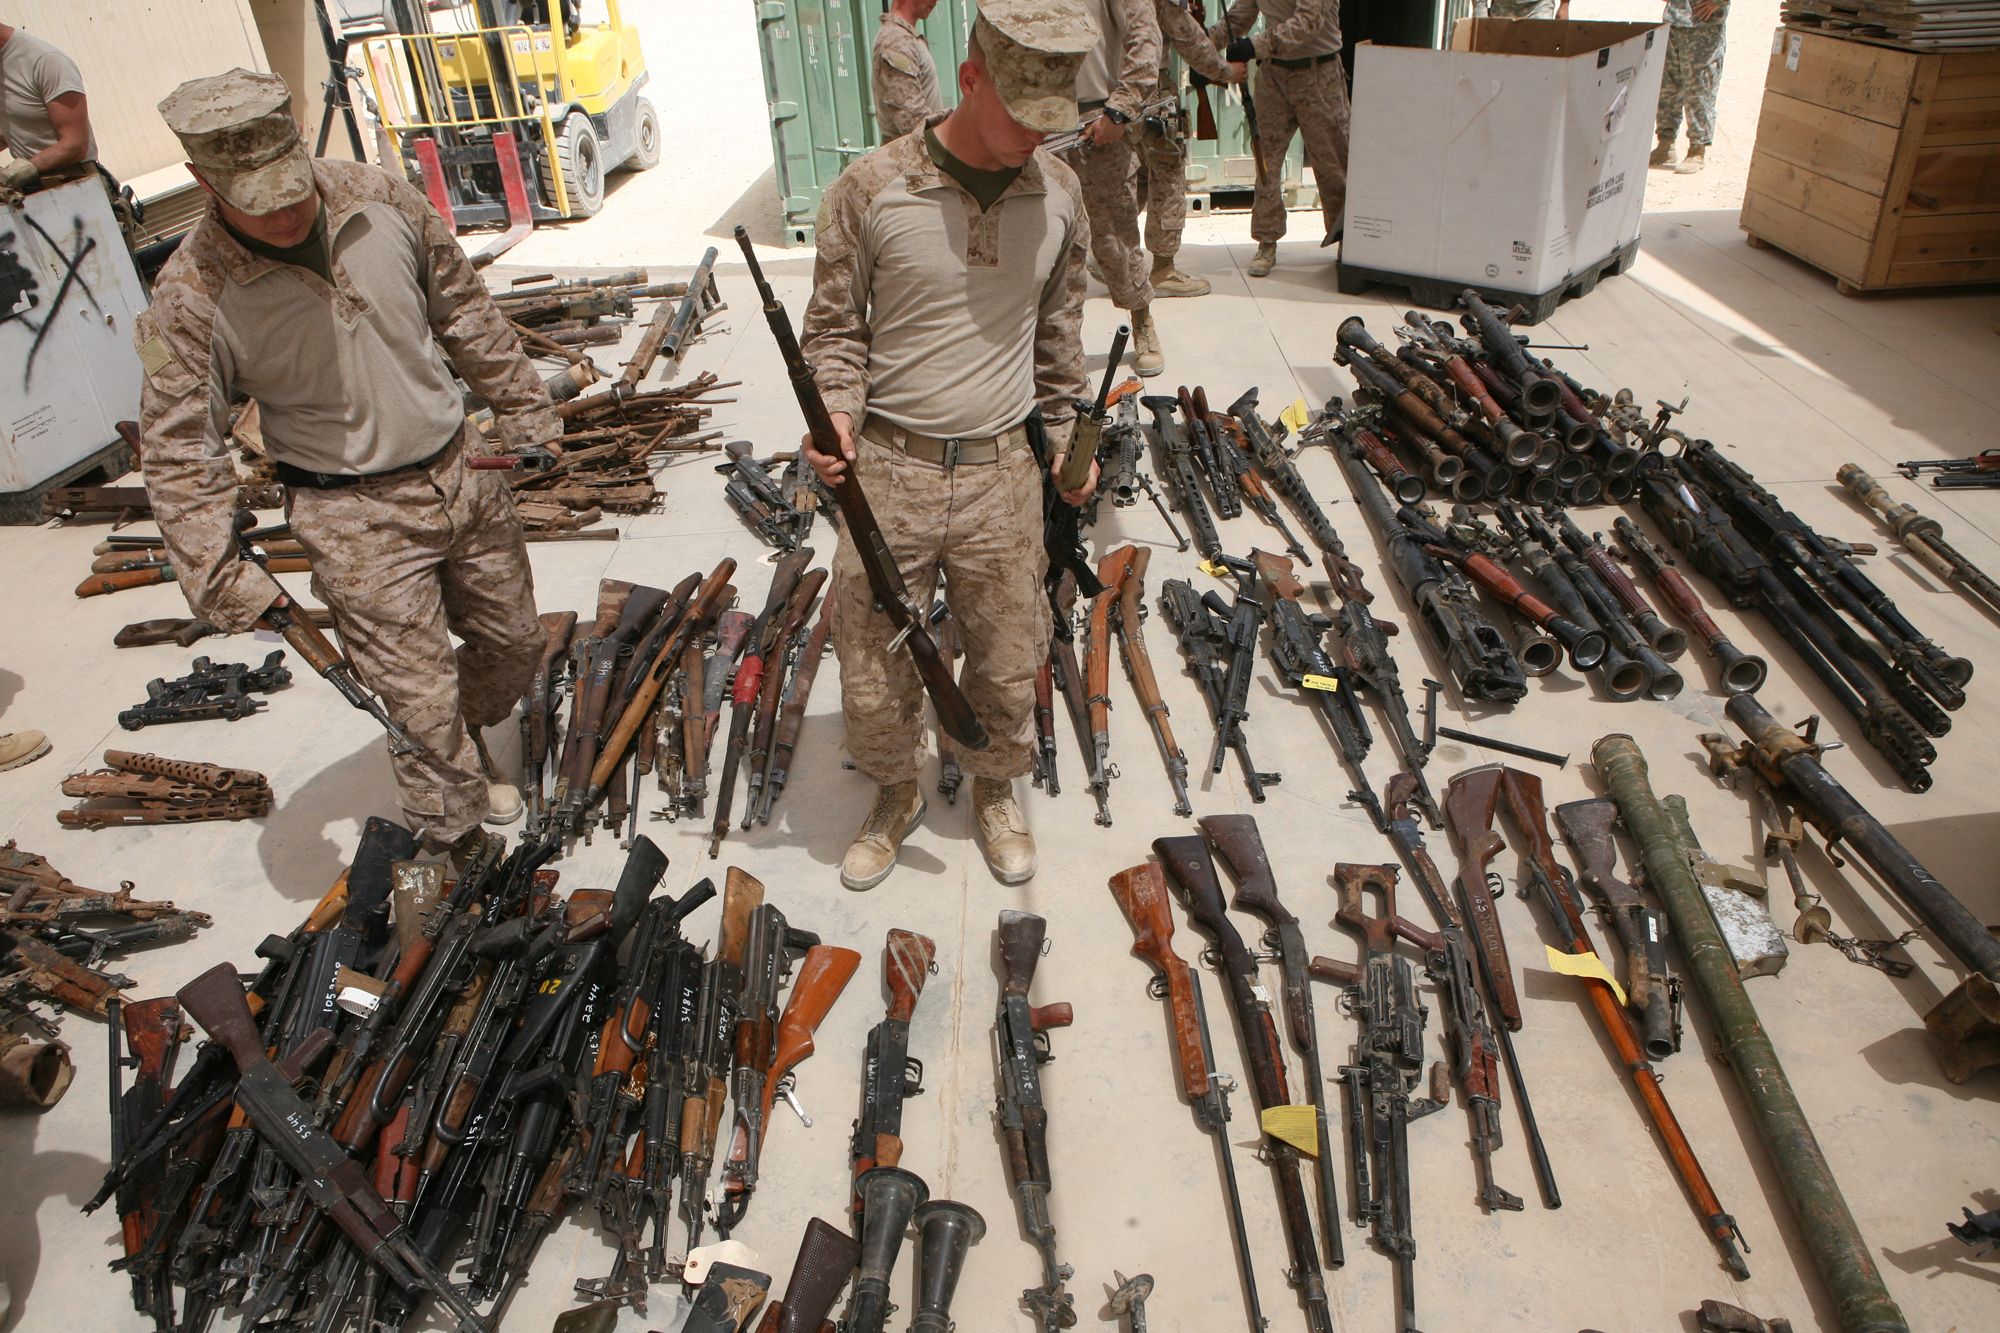 Marines with Engineer Ordnance Maintenance Platoon, Maintenance Company, 2nd Supply Battalion Reinforced, 2nd Marine Logistics Group (Forward), sort captured enemy weapons at the Taji National Maintenance Depot aboard Camp Taji, Iraq, July 28. The depot is responsible for destroying unserviceable weapons and turning over serviceable weapons to the Iraqi government to support the Iraqi army.